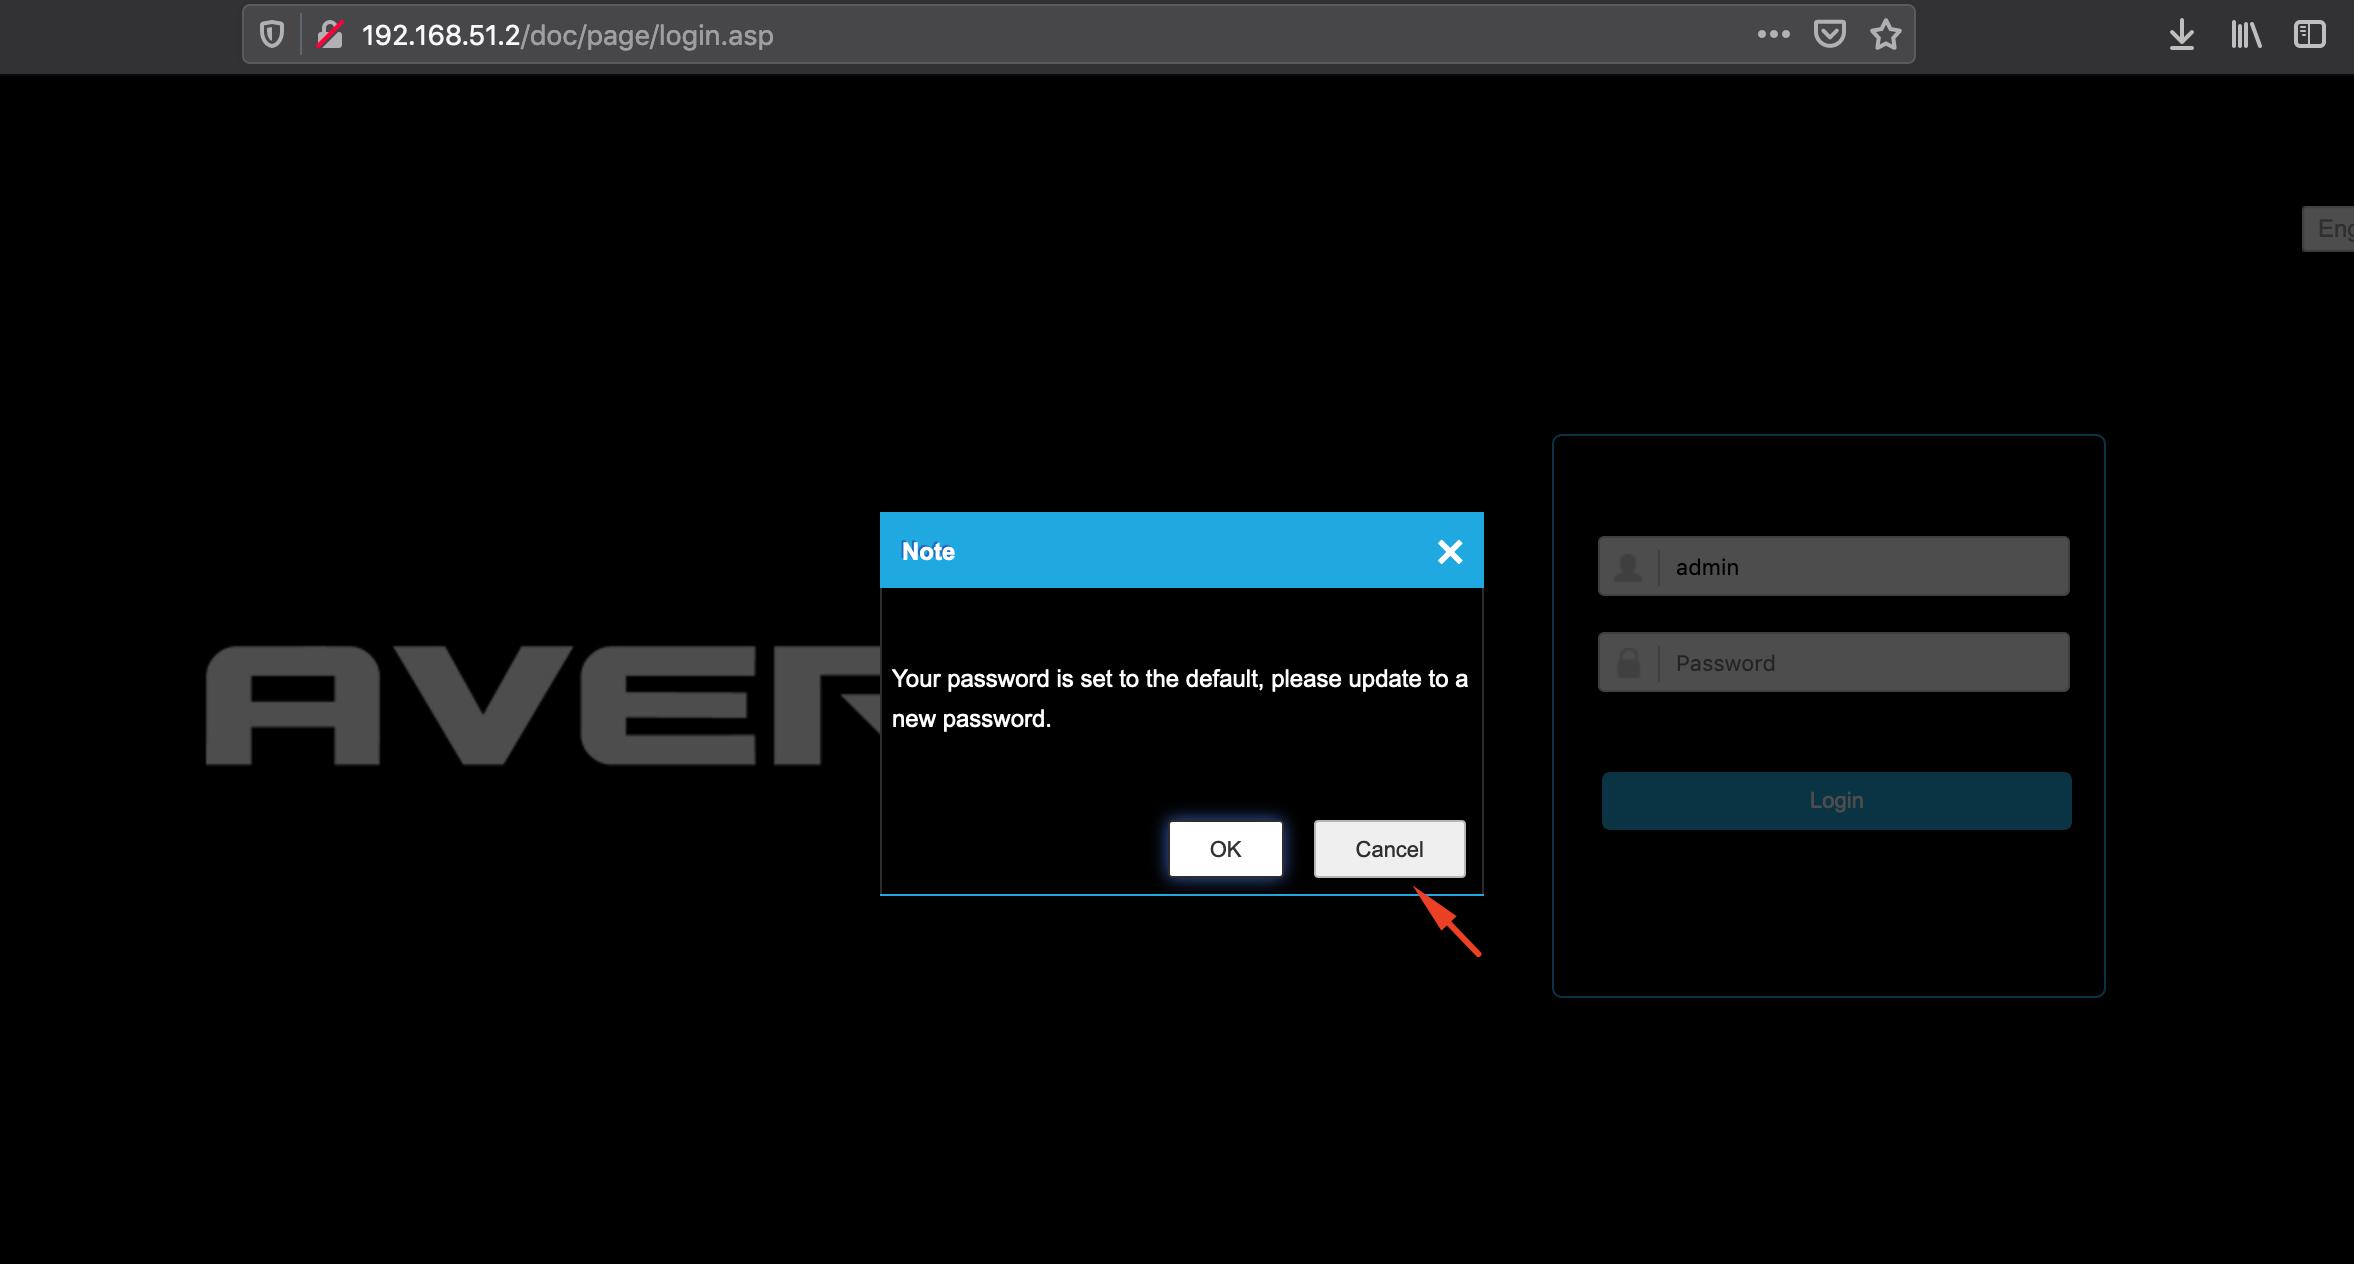 AvertX IP cameras show a pop-up window suggesting the user change the default password for the admin account, but the suggestion can be ignored.